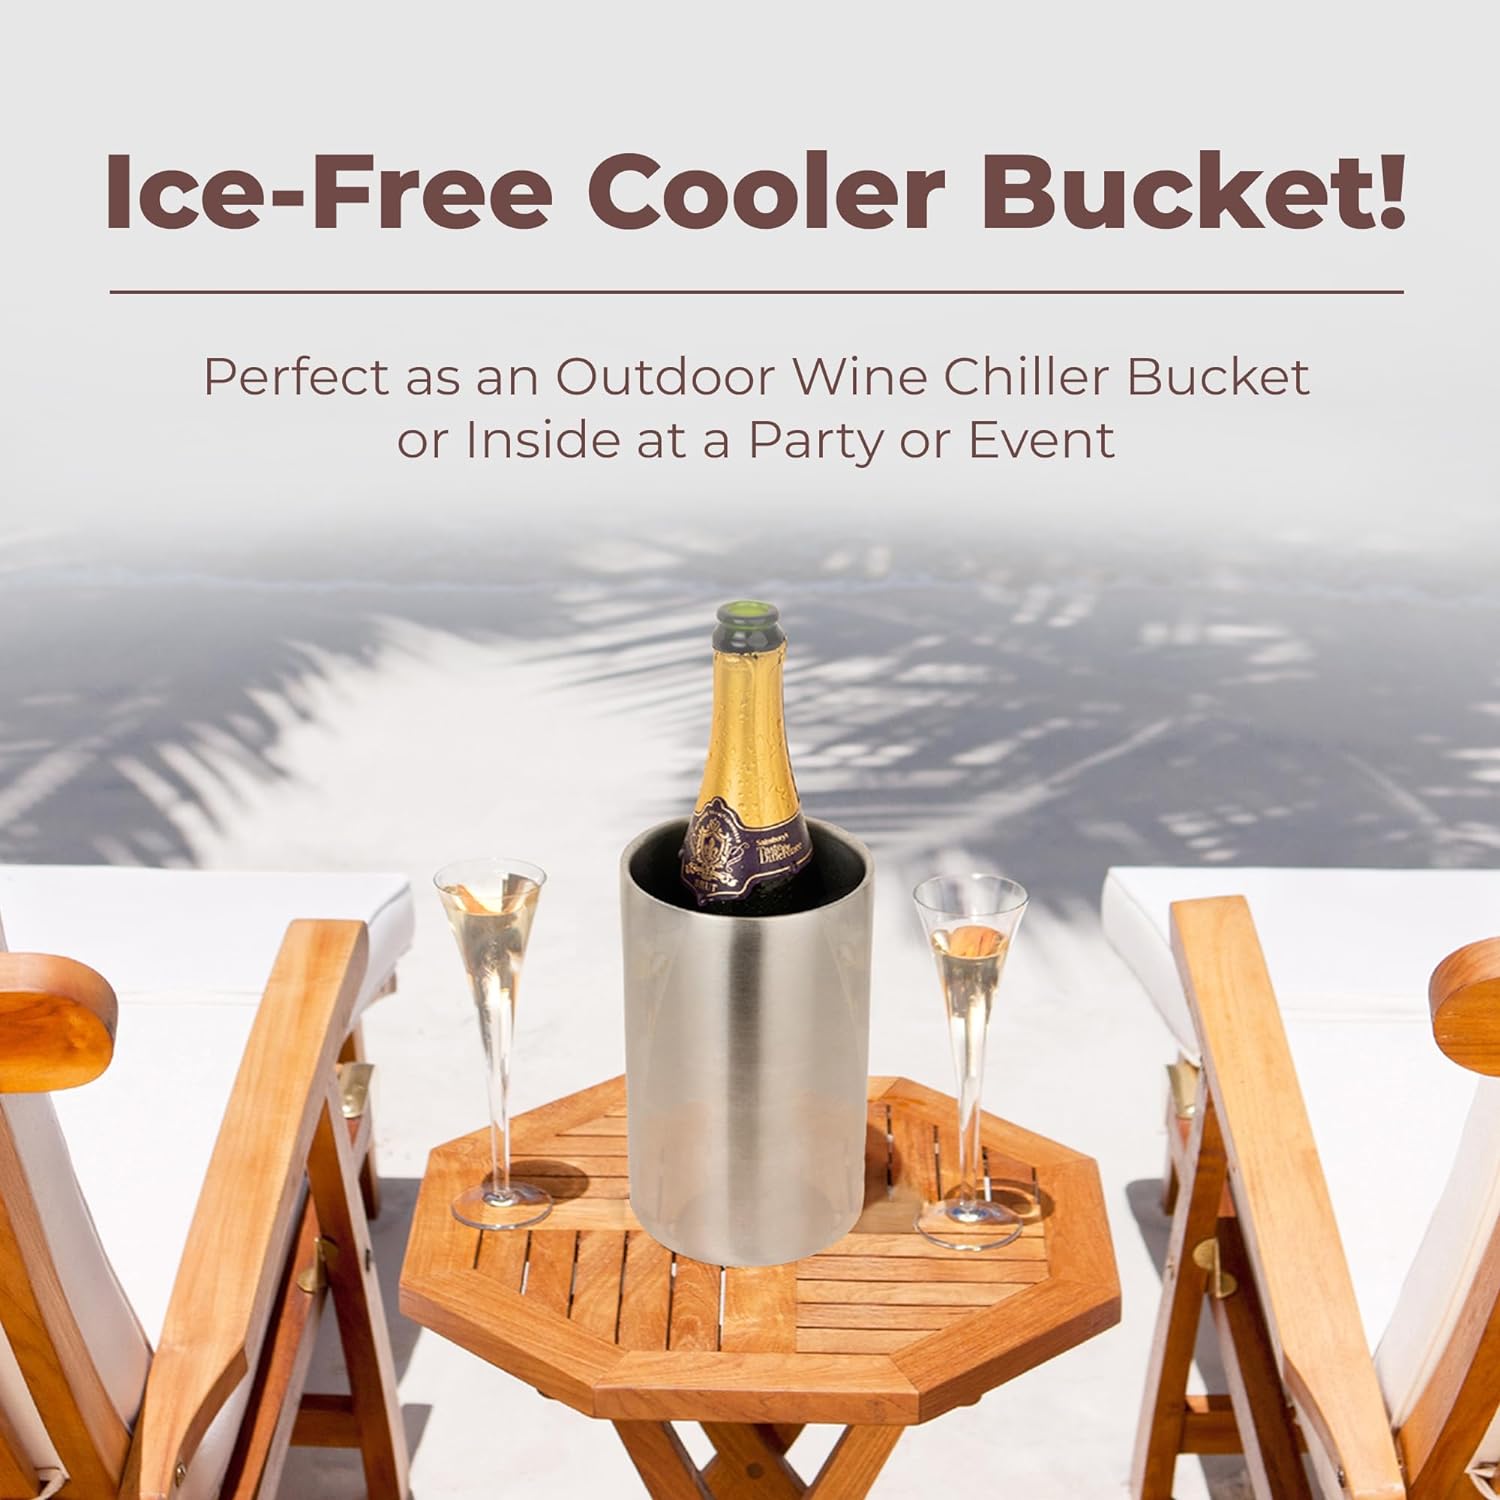 Wine Cooler, Prosecco & Champagne Bucket, Wine Bottle Cooler, Wine Accessories, Gifts for Wine Lovers, Iceless Cooler, Wine Chiller Single Bottle, 7.5x4.3”, Bucket Cooler, Champagne Cooler Bucket - Amazing Gadgets Outlet